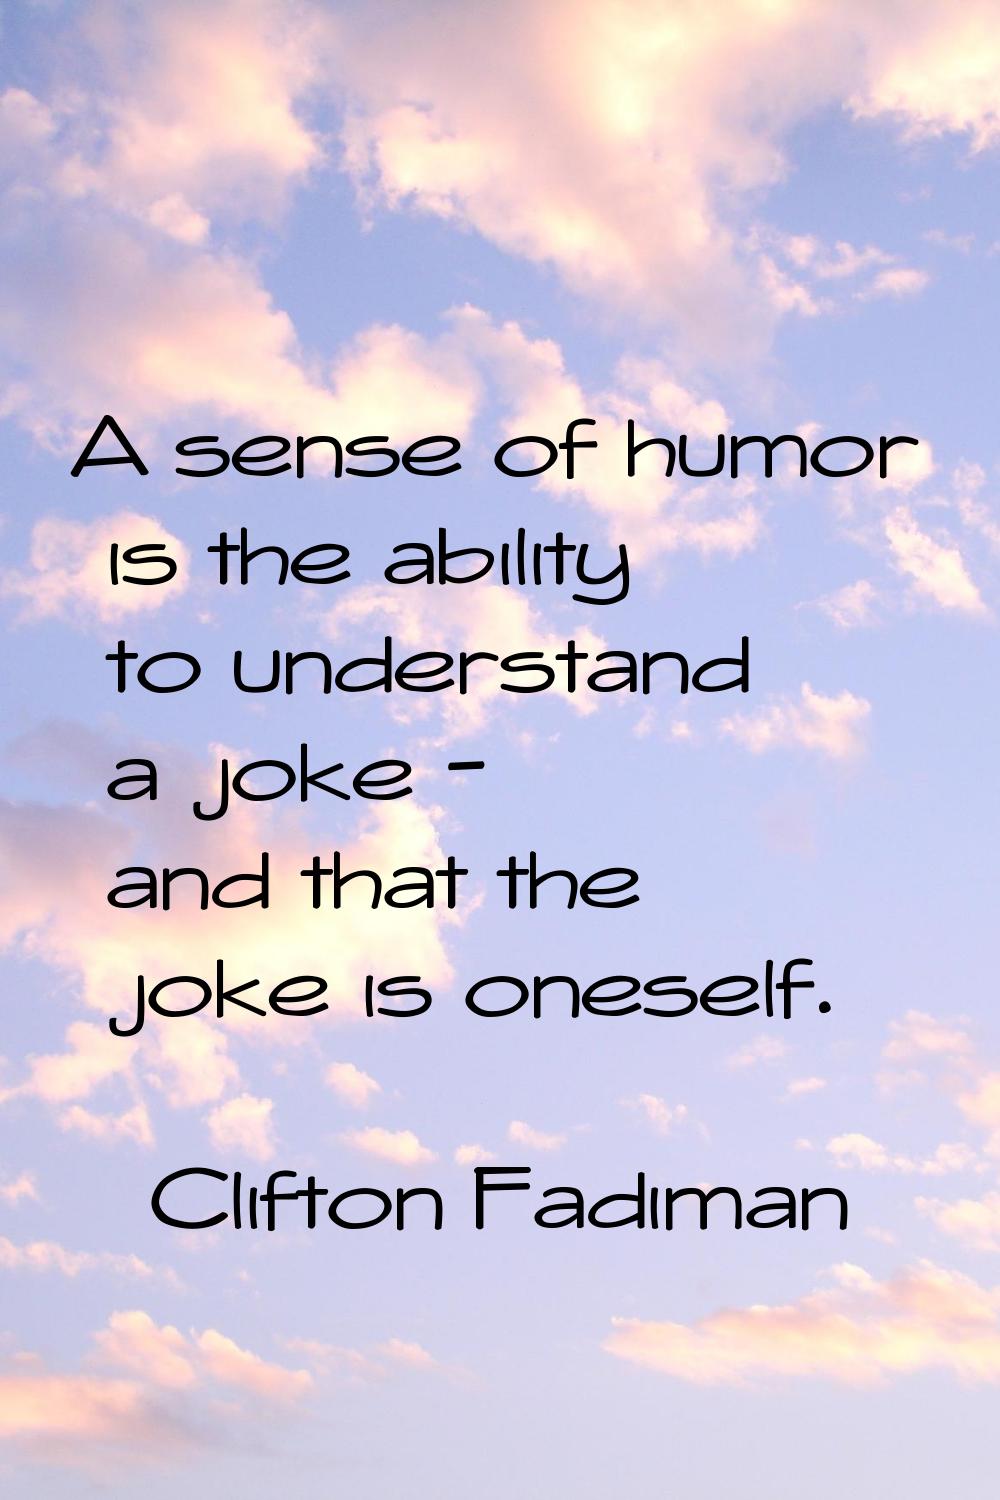 A sense of humor is the ability to understand a joke - and that the joke is oneself.